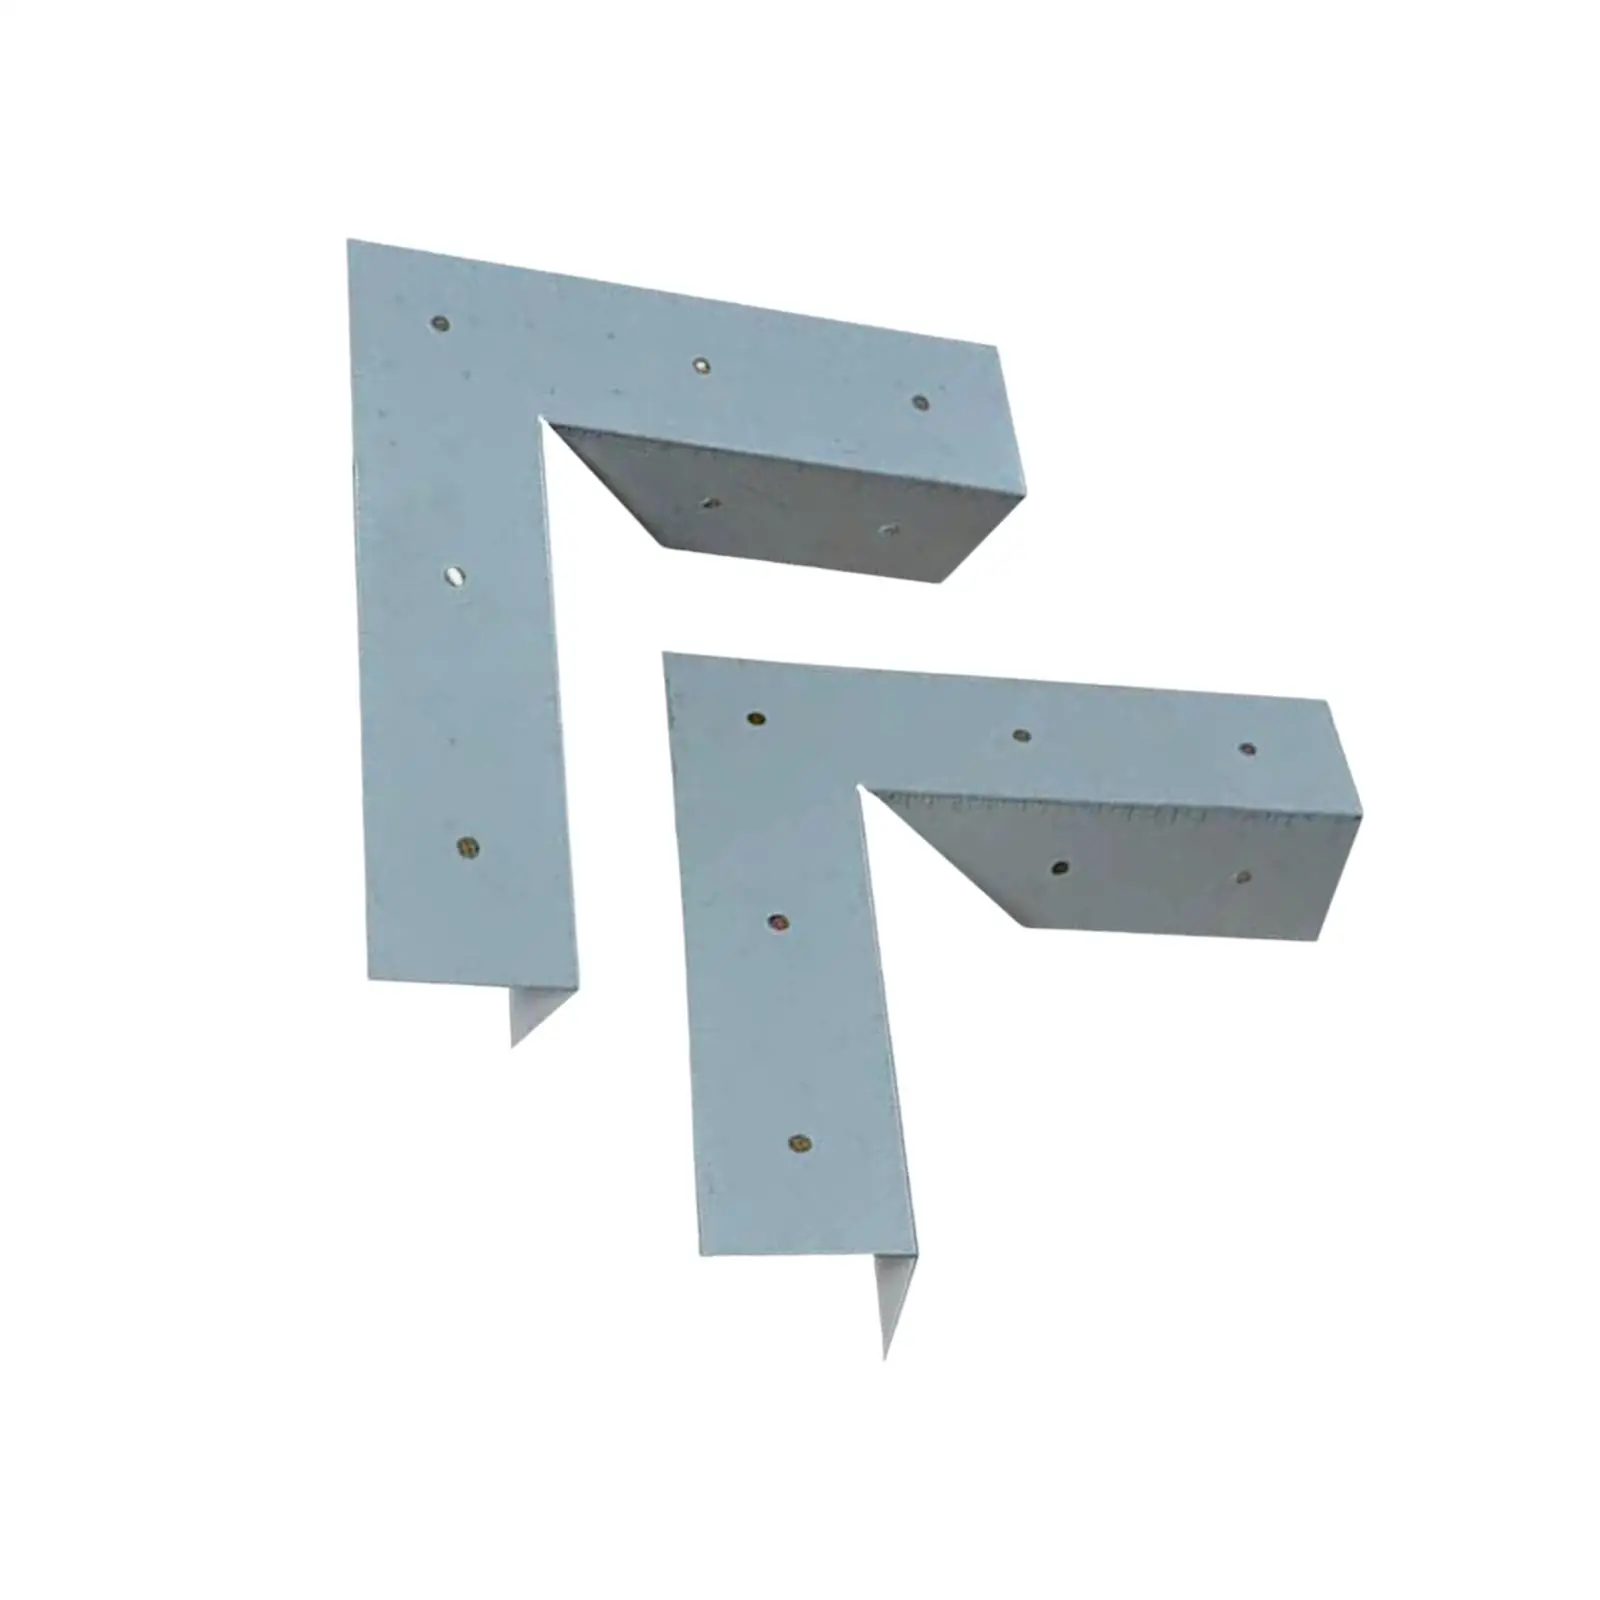 2 Pieces Angles Fixing hardware Furniture Repair Fittings Joint Fasteners Corner Reinforcement Brackets for Cupboard Wall Racks